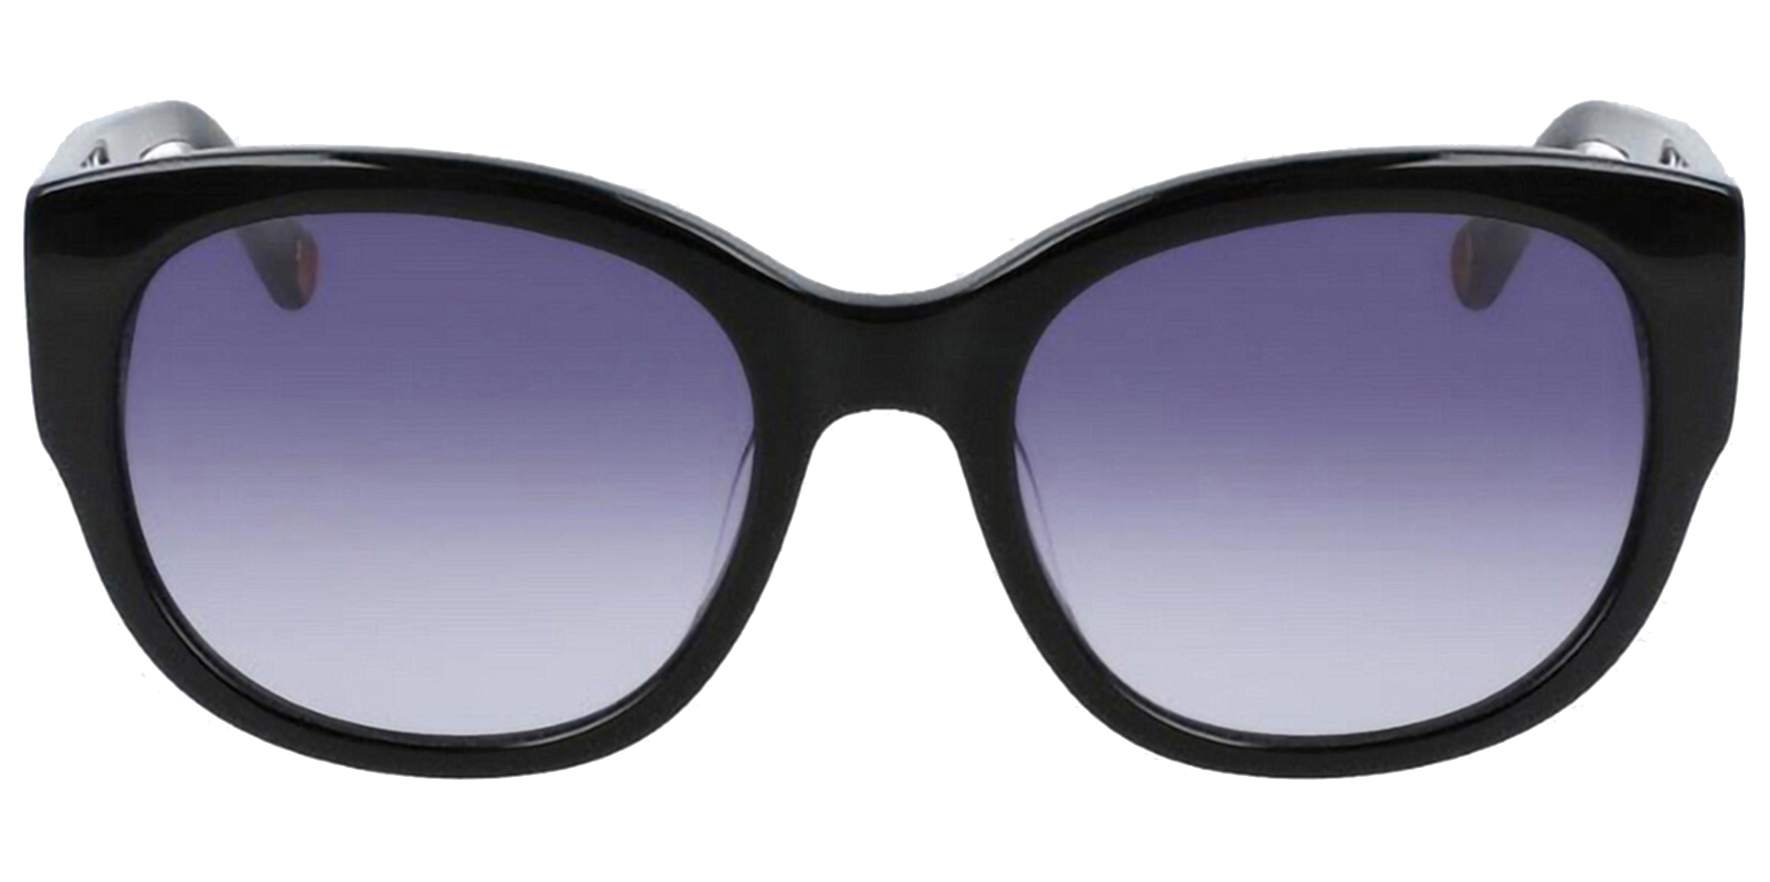 Bebe Stylized Round w/ Wide Temples & Chain Attachment – Eyedictive